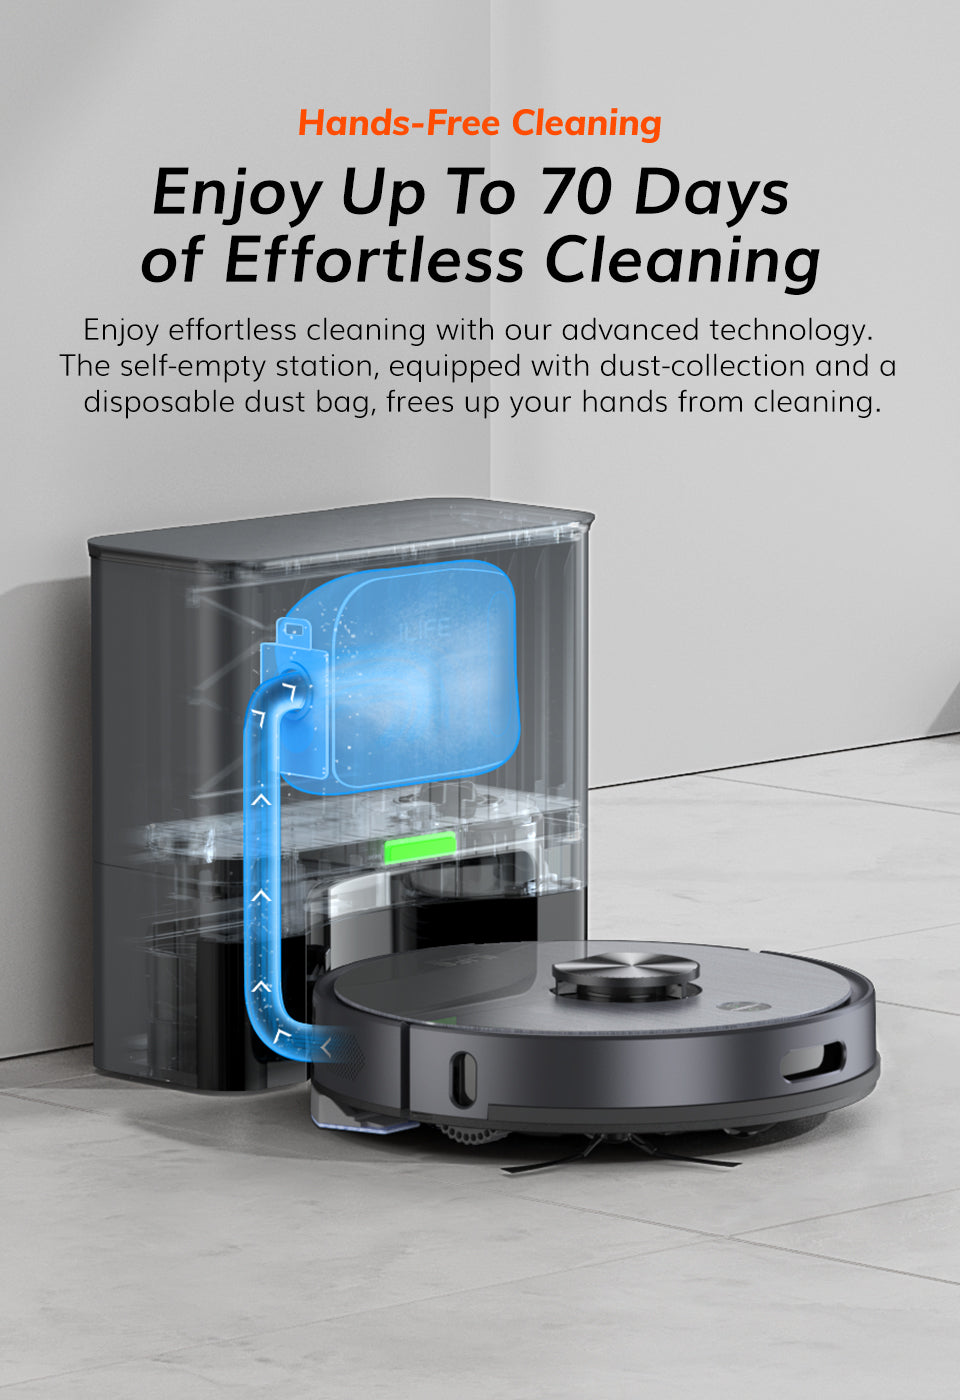 Up to 70 Days of Hands-free Cleaning